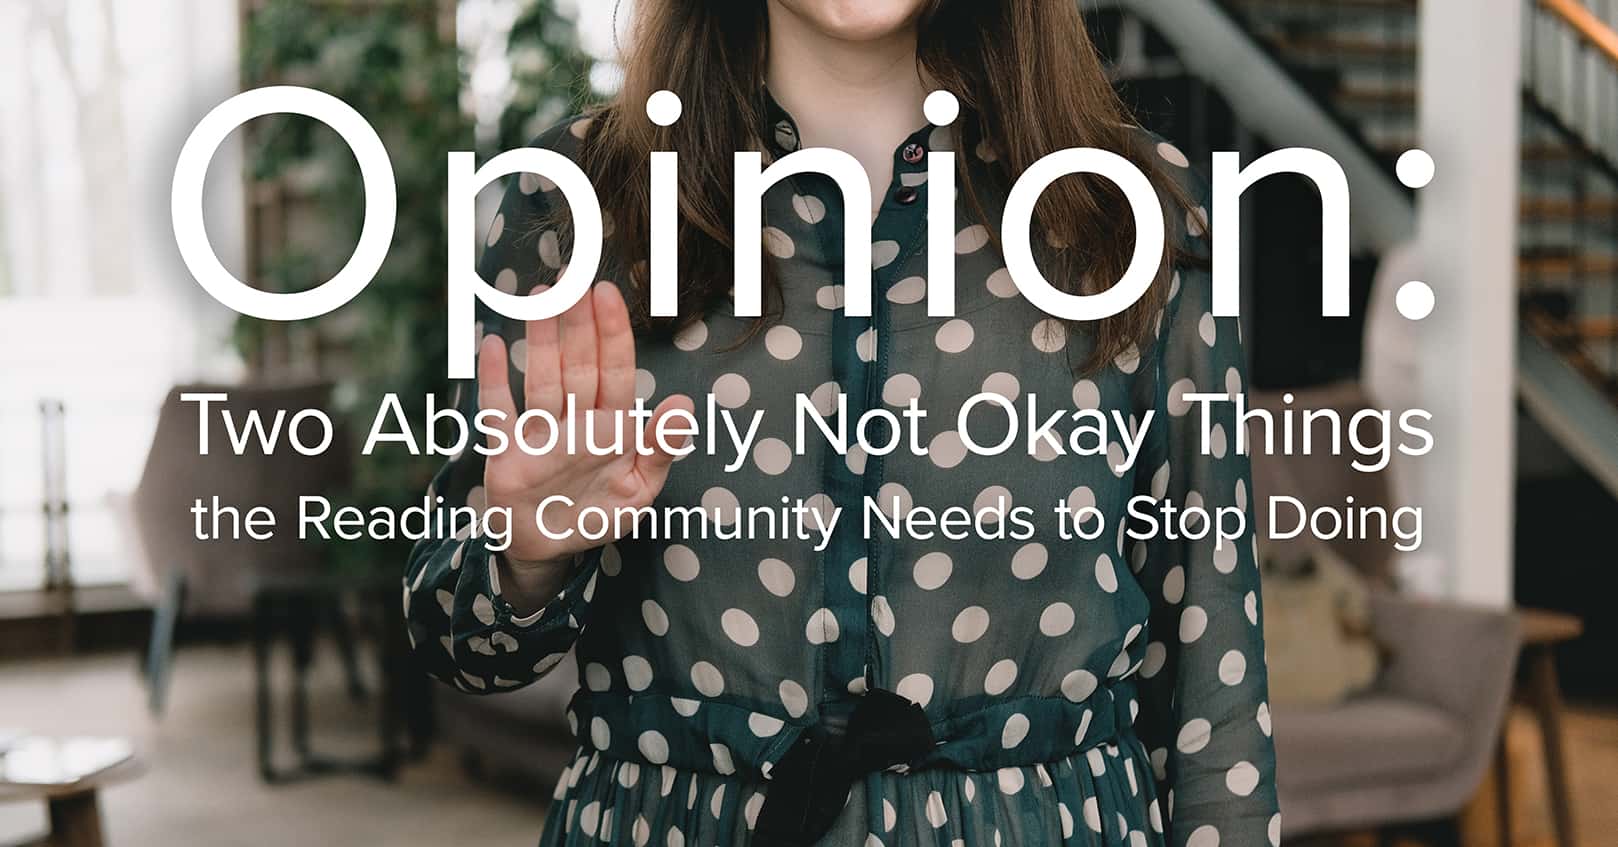 Opinion: Two Absolutely Not Okay Things the Reading Community Needs to Stop Doing